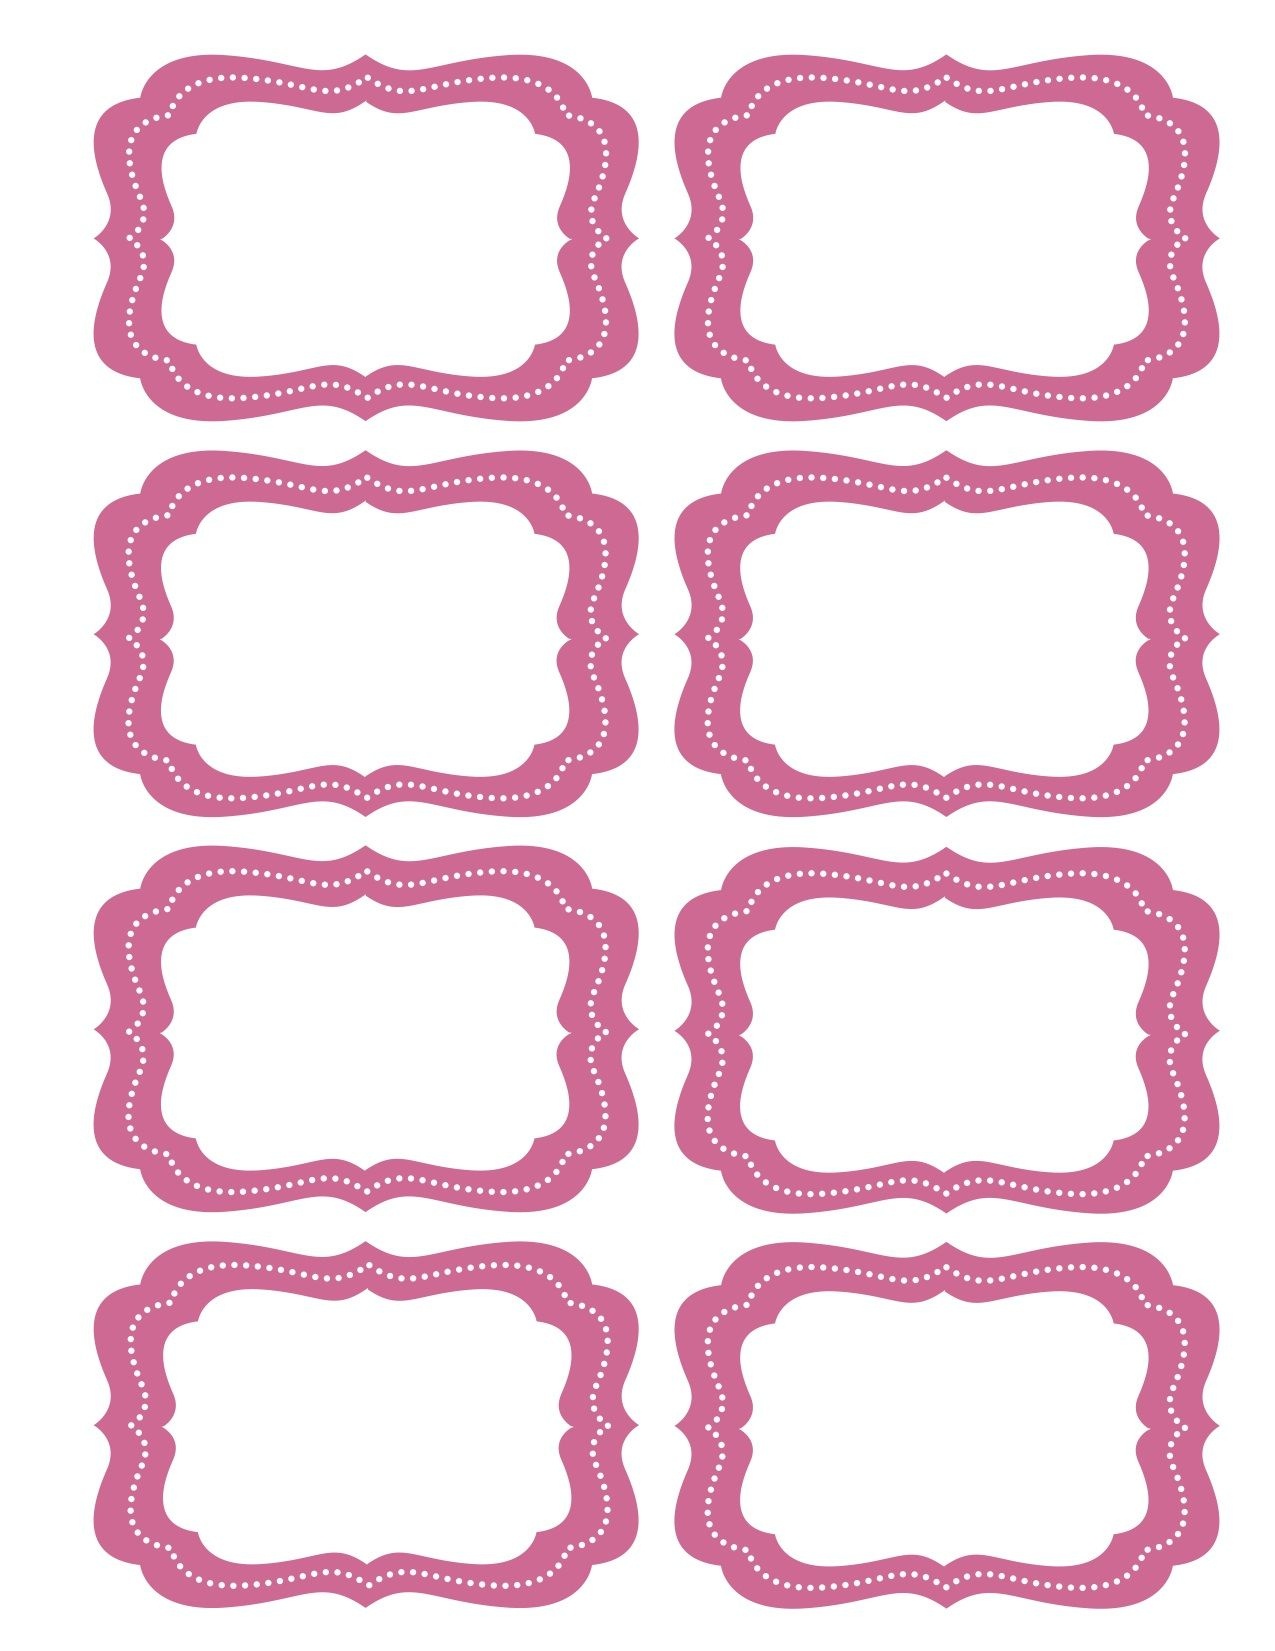 Free Printable Bag Label Templates | Candy Labels Blank Image - Free Customizable Printable Labels